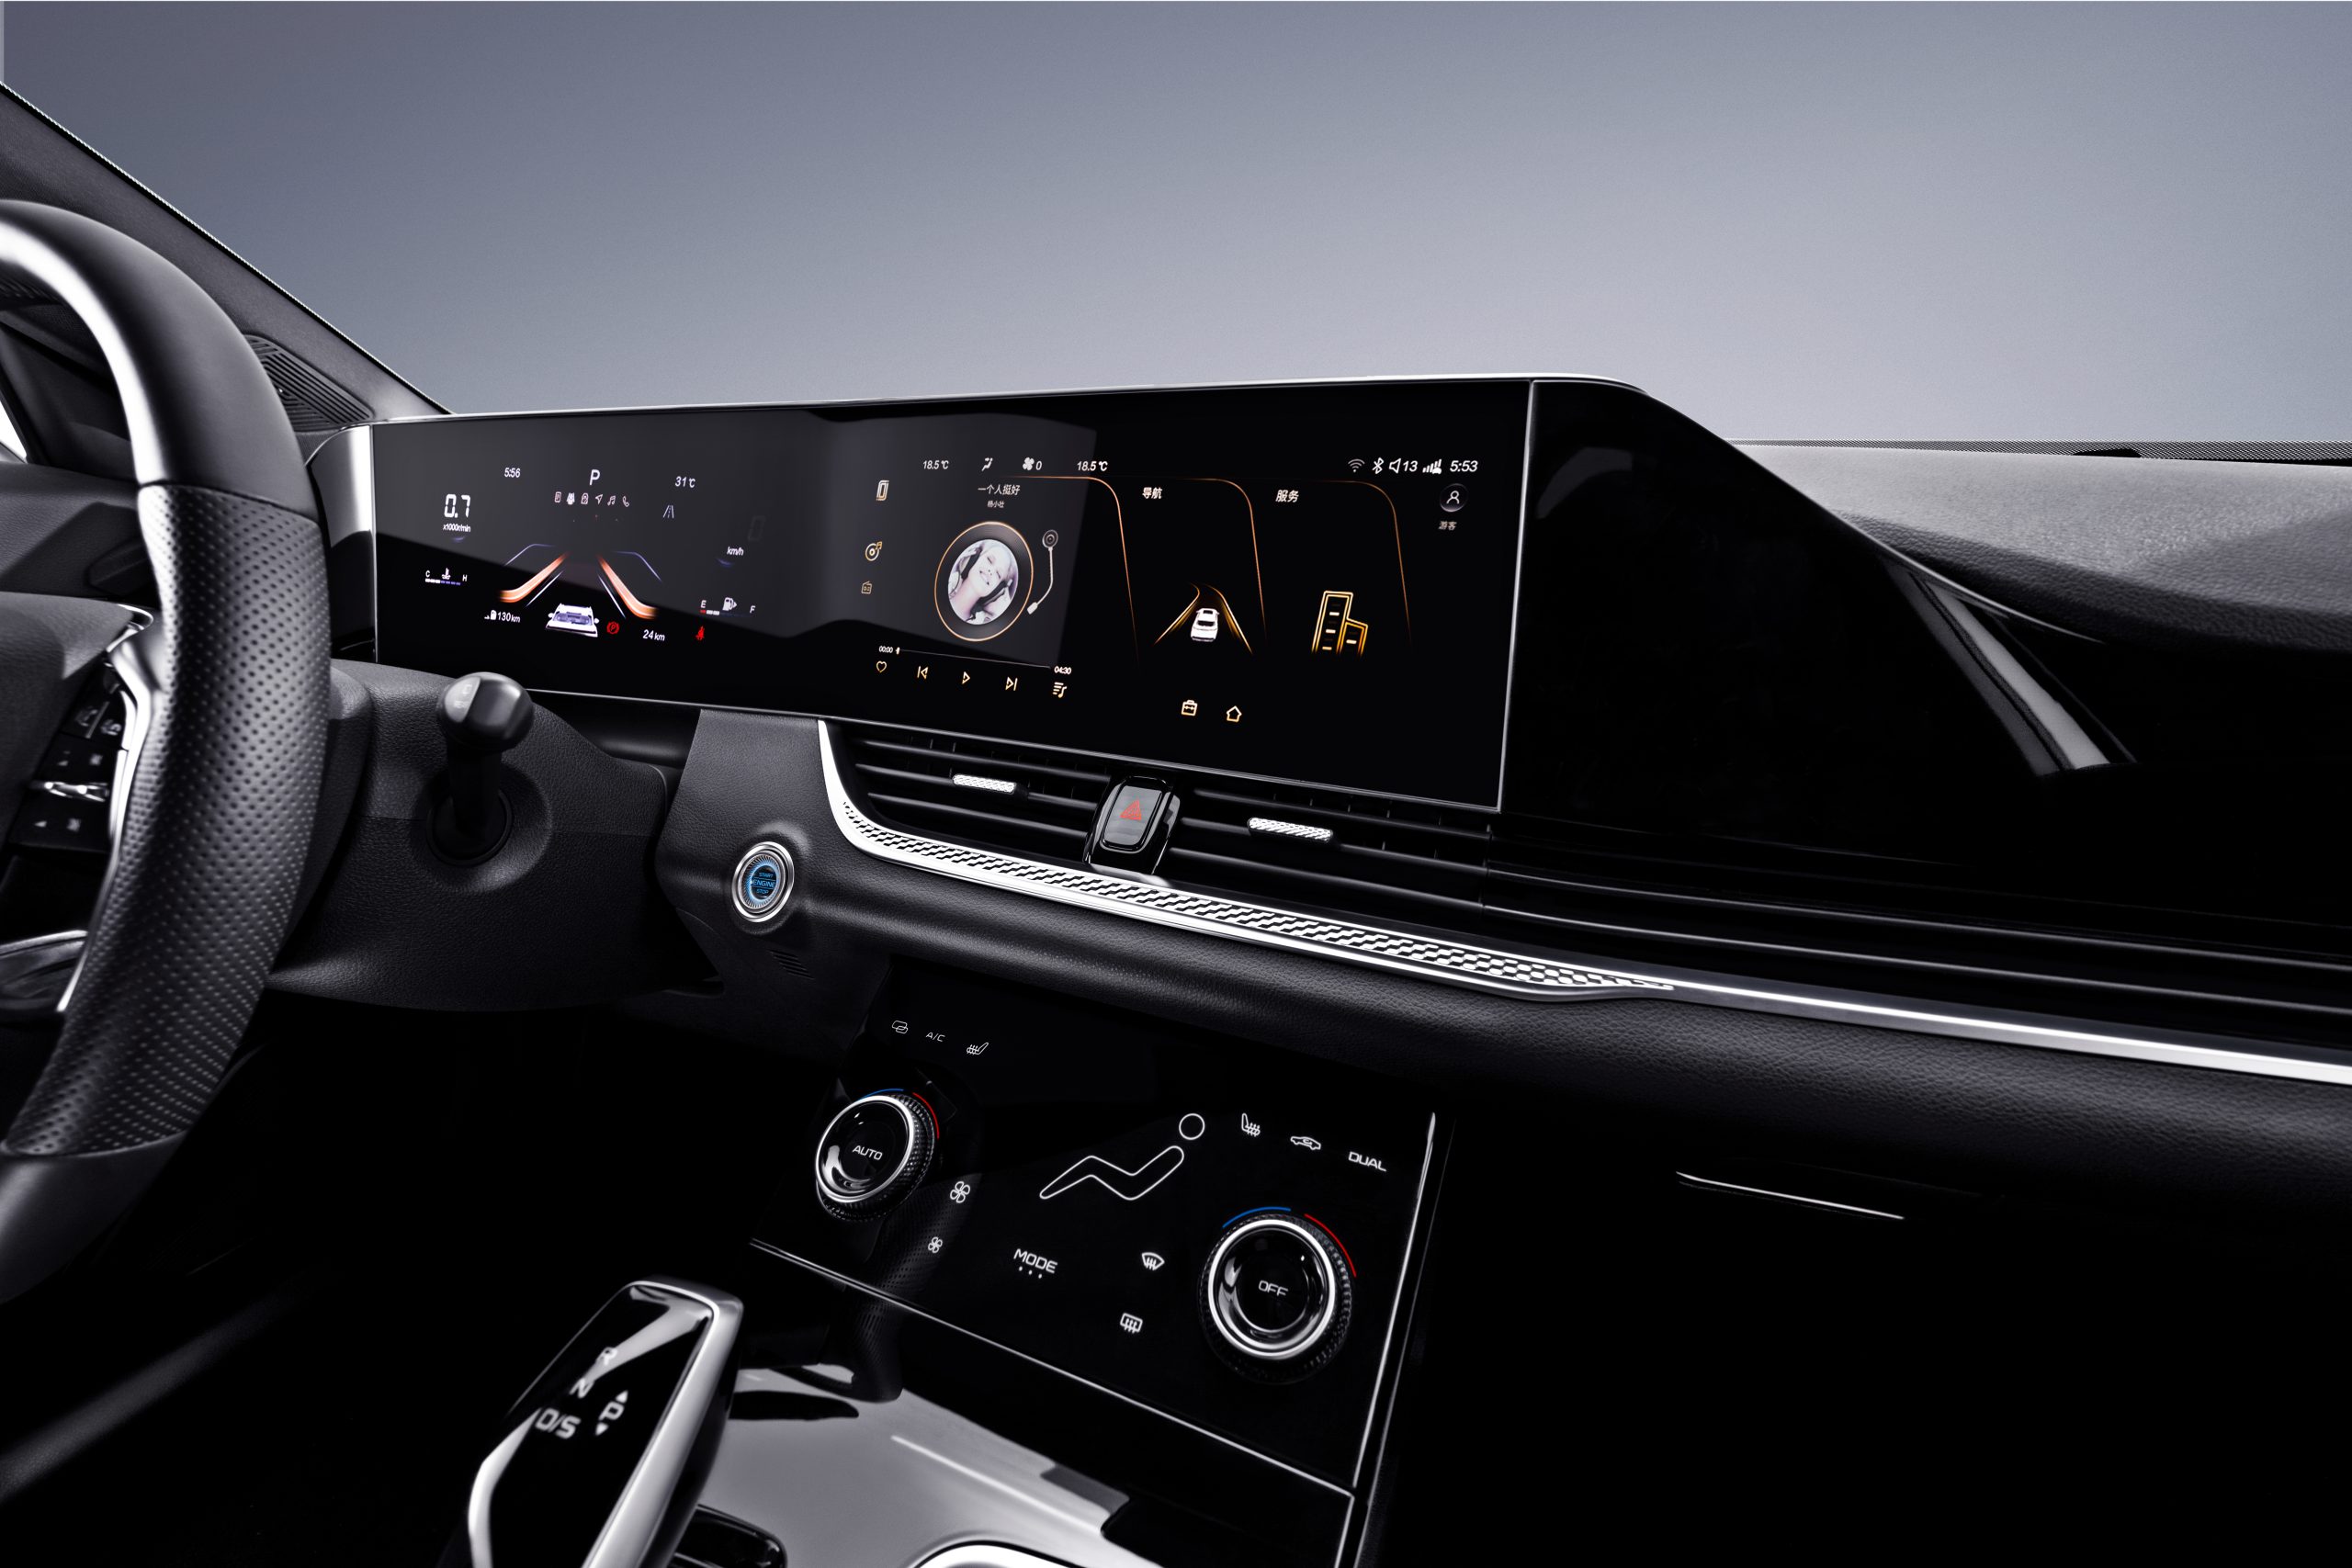 Dual 12.3-inch screen + 7-inch Air Conditioning Touch Panel